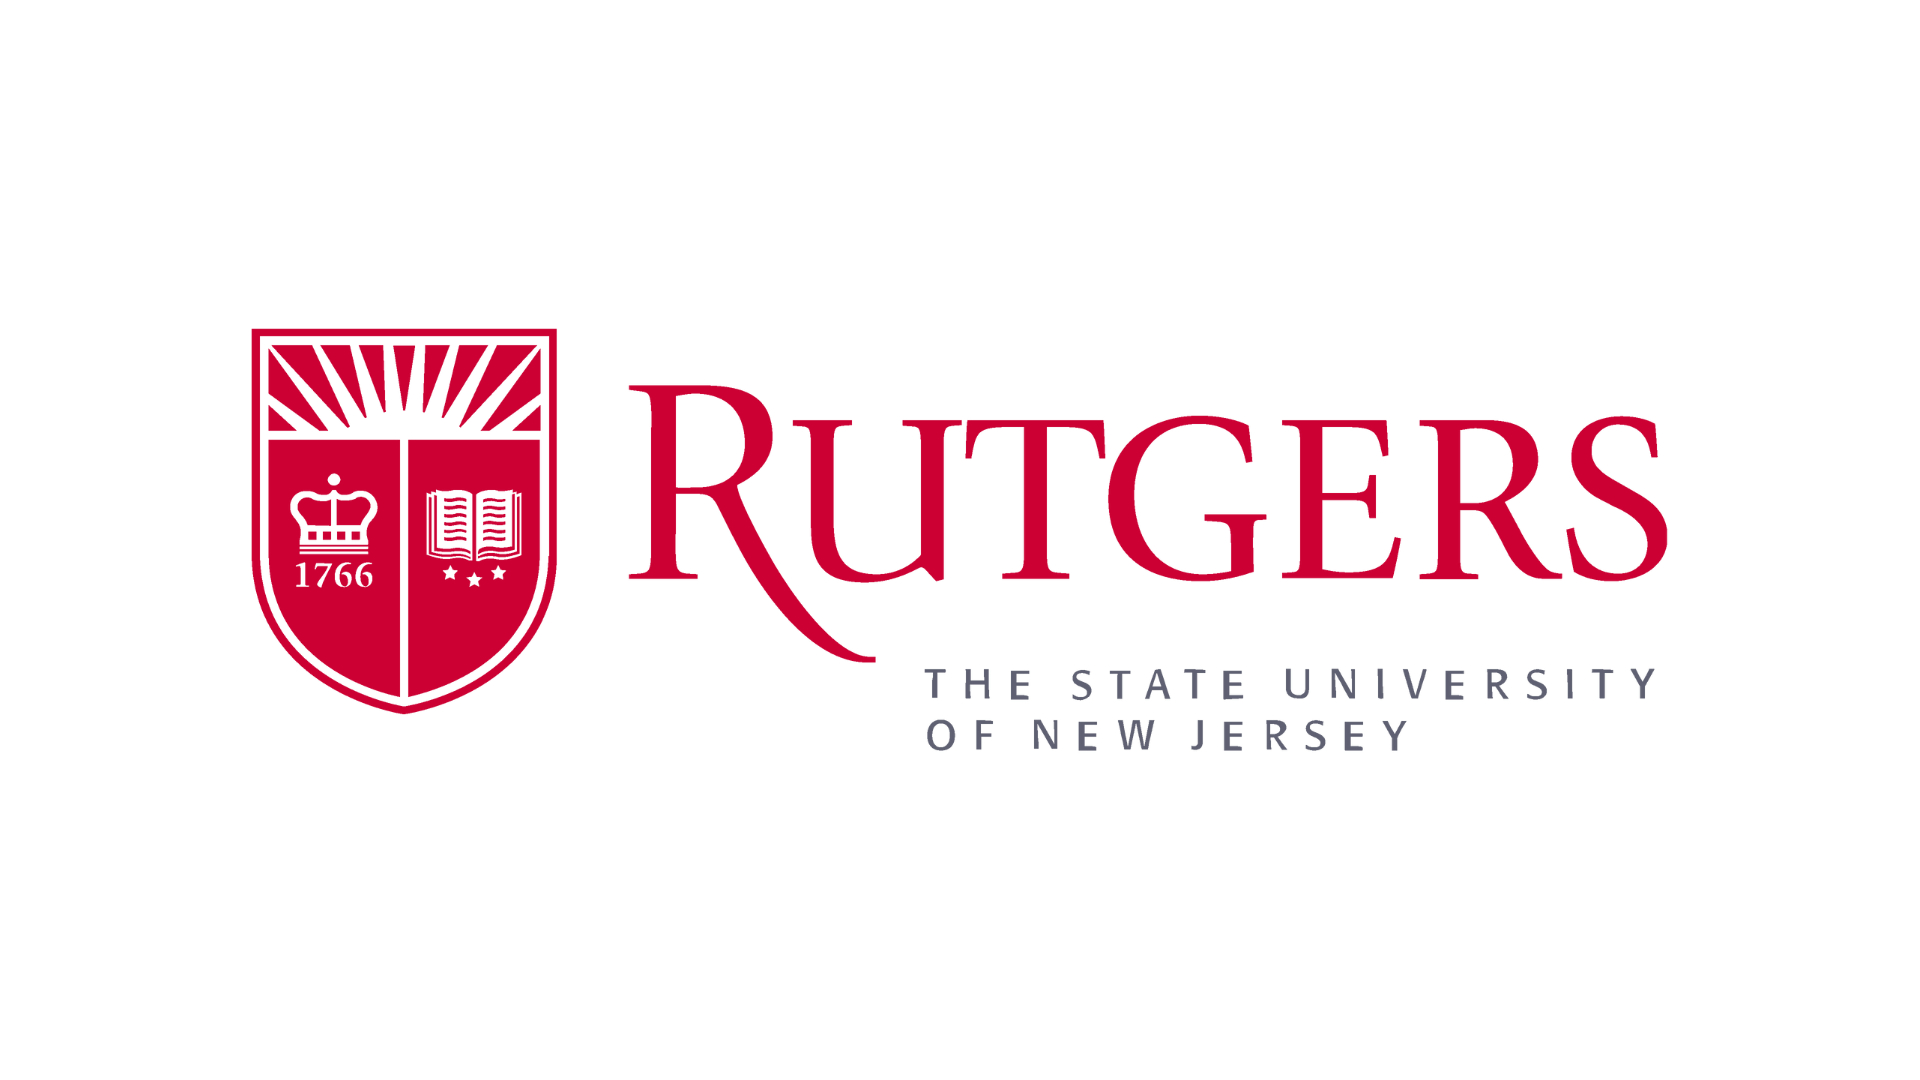 Rutgers Logo - North Jersey Physical Therapy Associates Inc.png